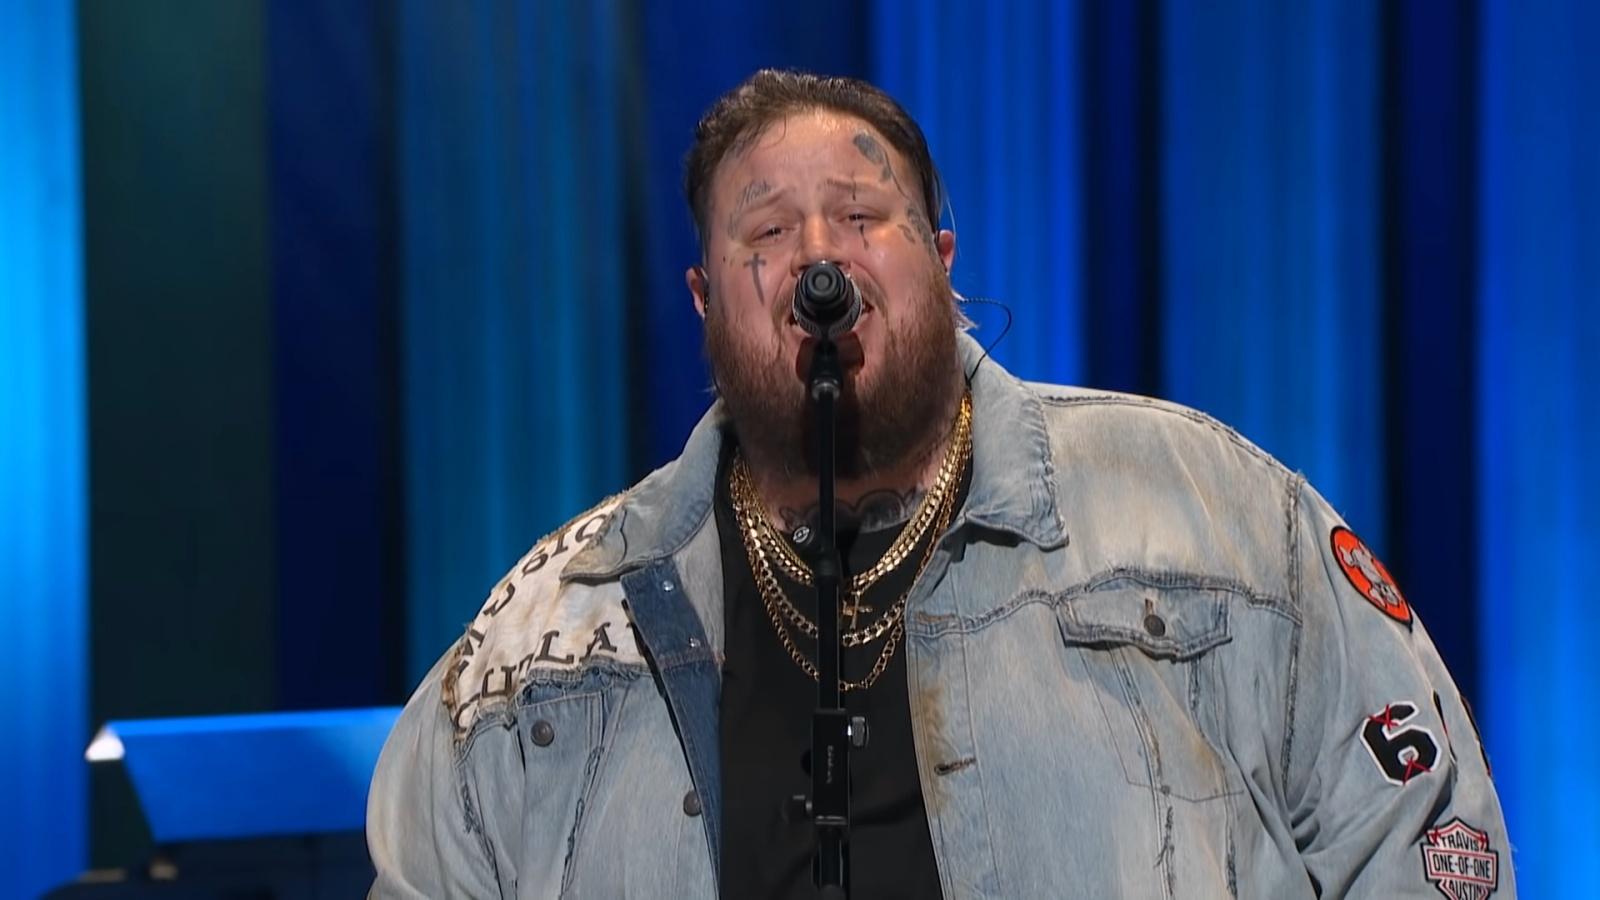 Jelly Roll performing behind a microphone onstage at the Opry